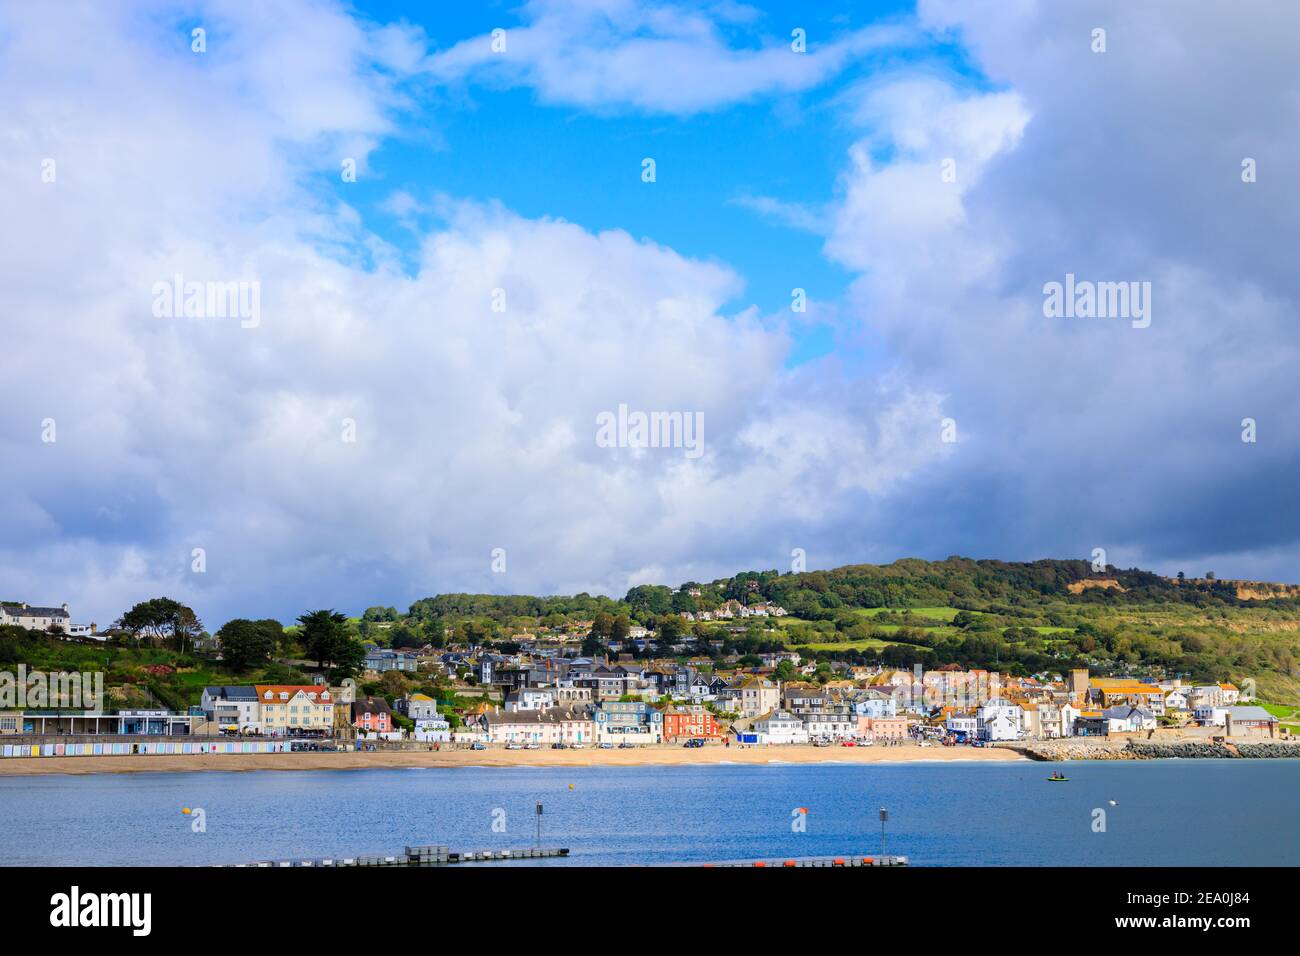 View of Lyme Regis, a coastal town in West Dorset, England, on the English Channel coast at the Dorset–Devon border, nicknamed 'The Pearl of Dorset' Stock Photo